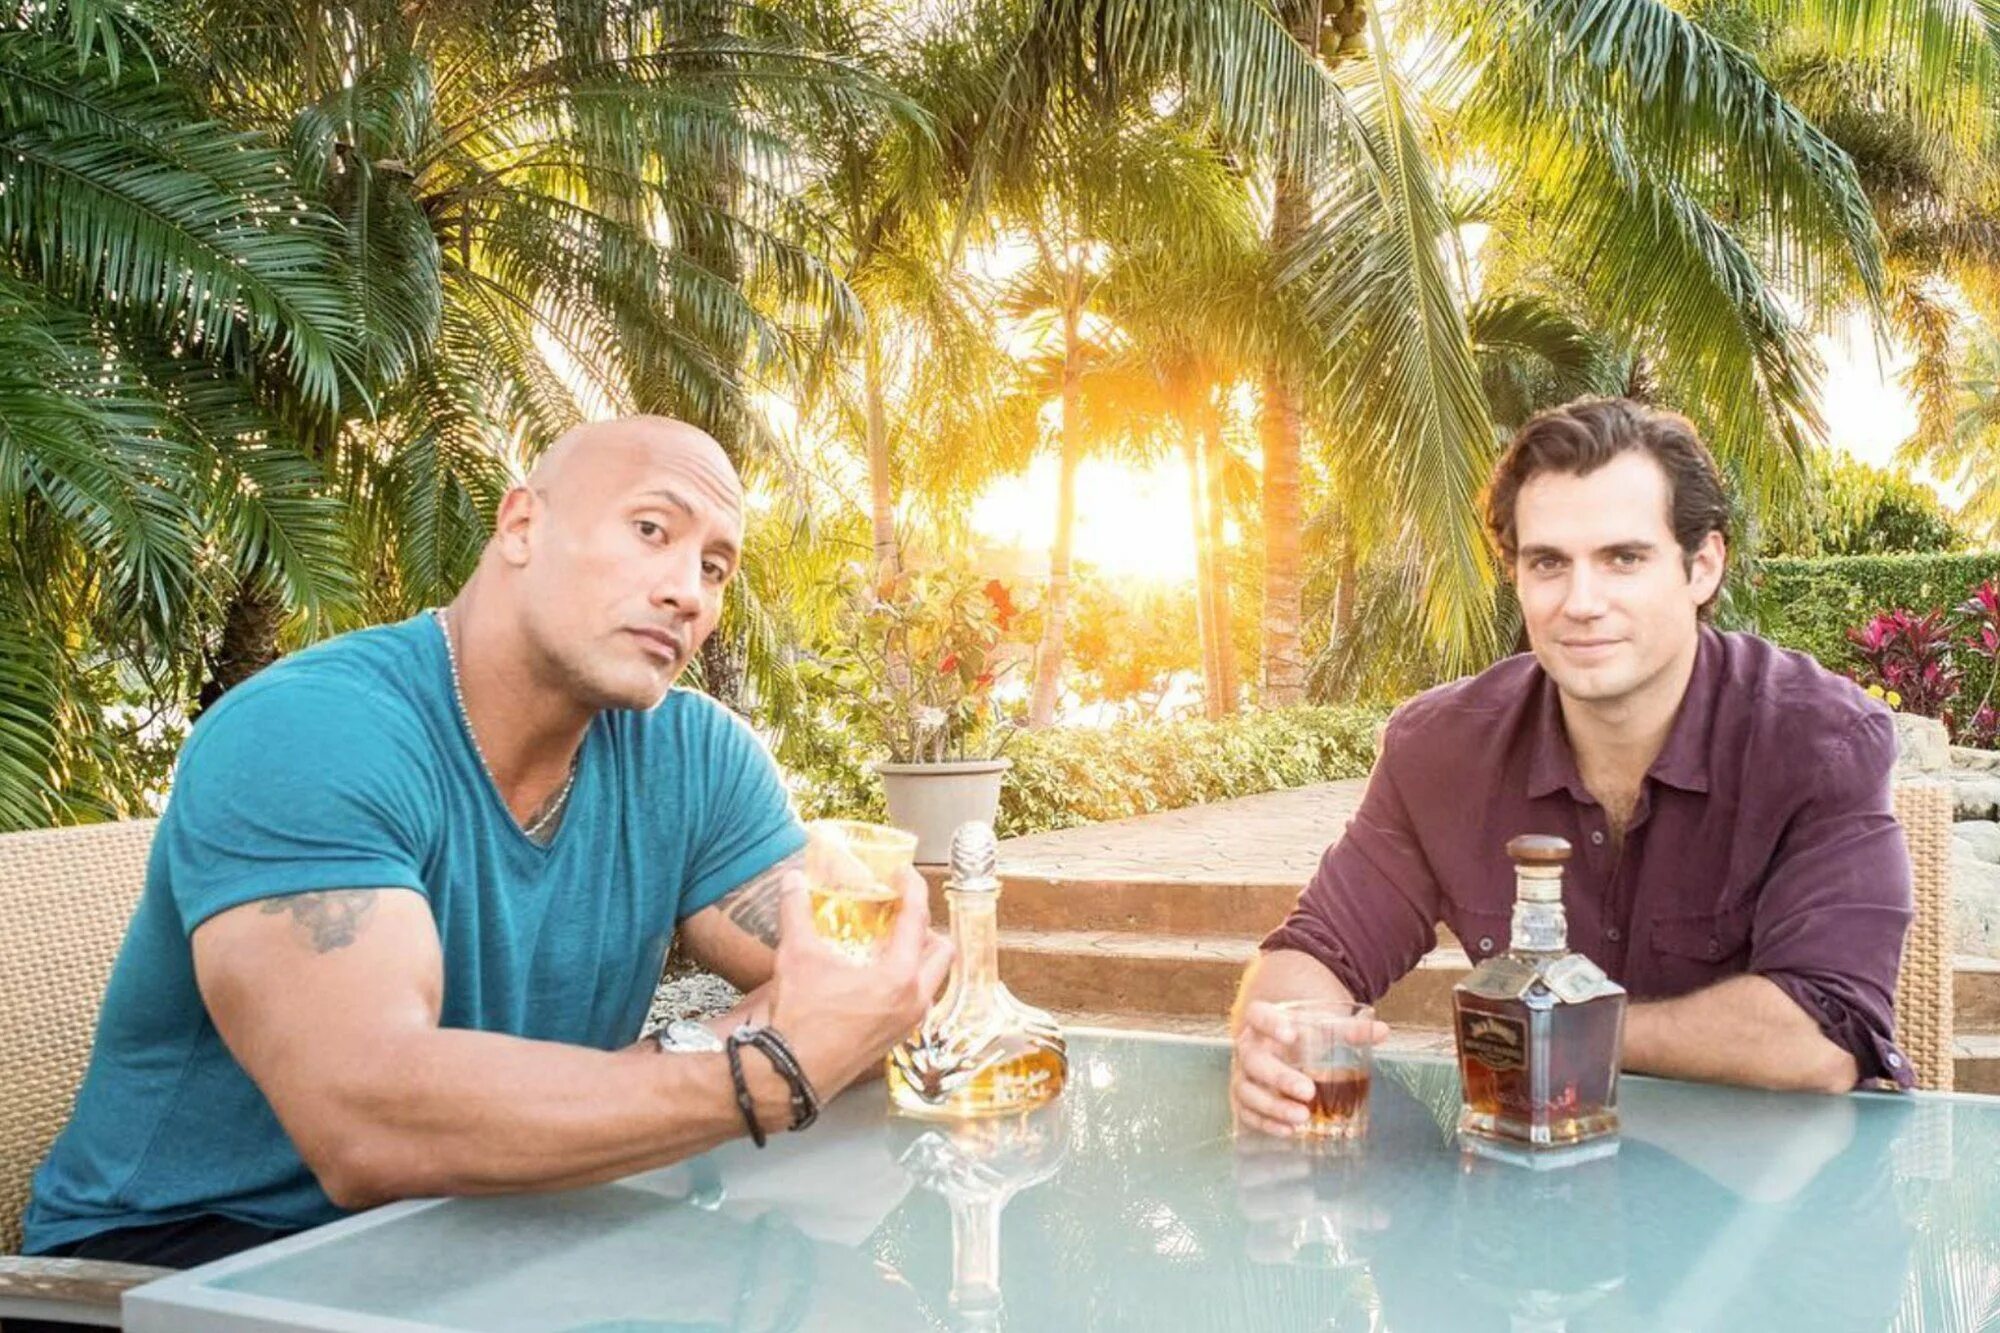 2 men in the world. Henry Cavill and Dwayne Johnson.